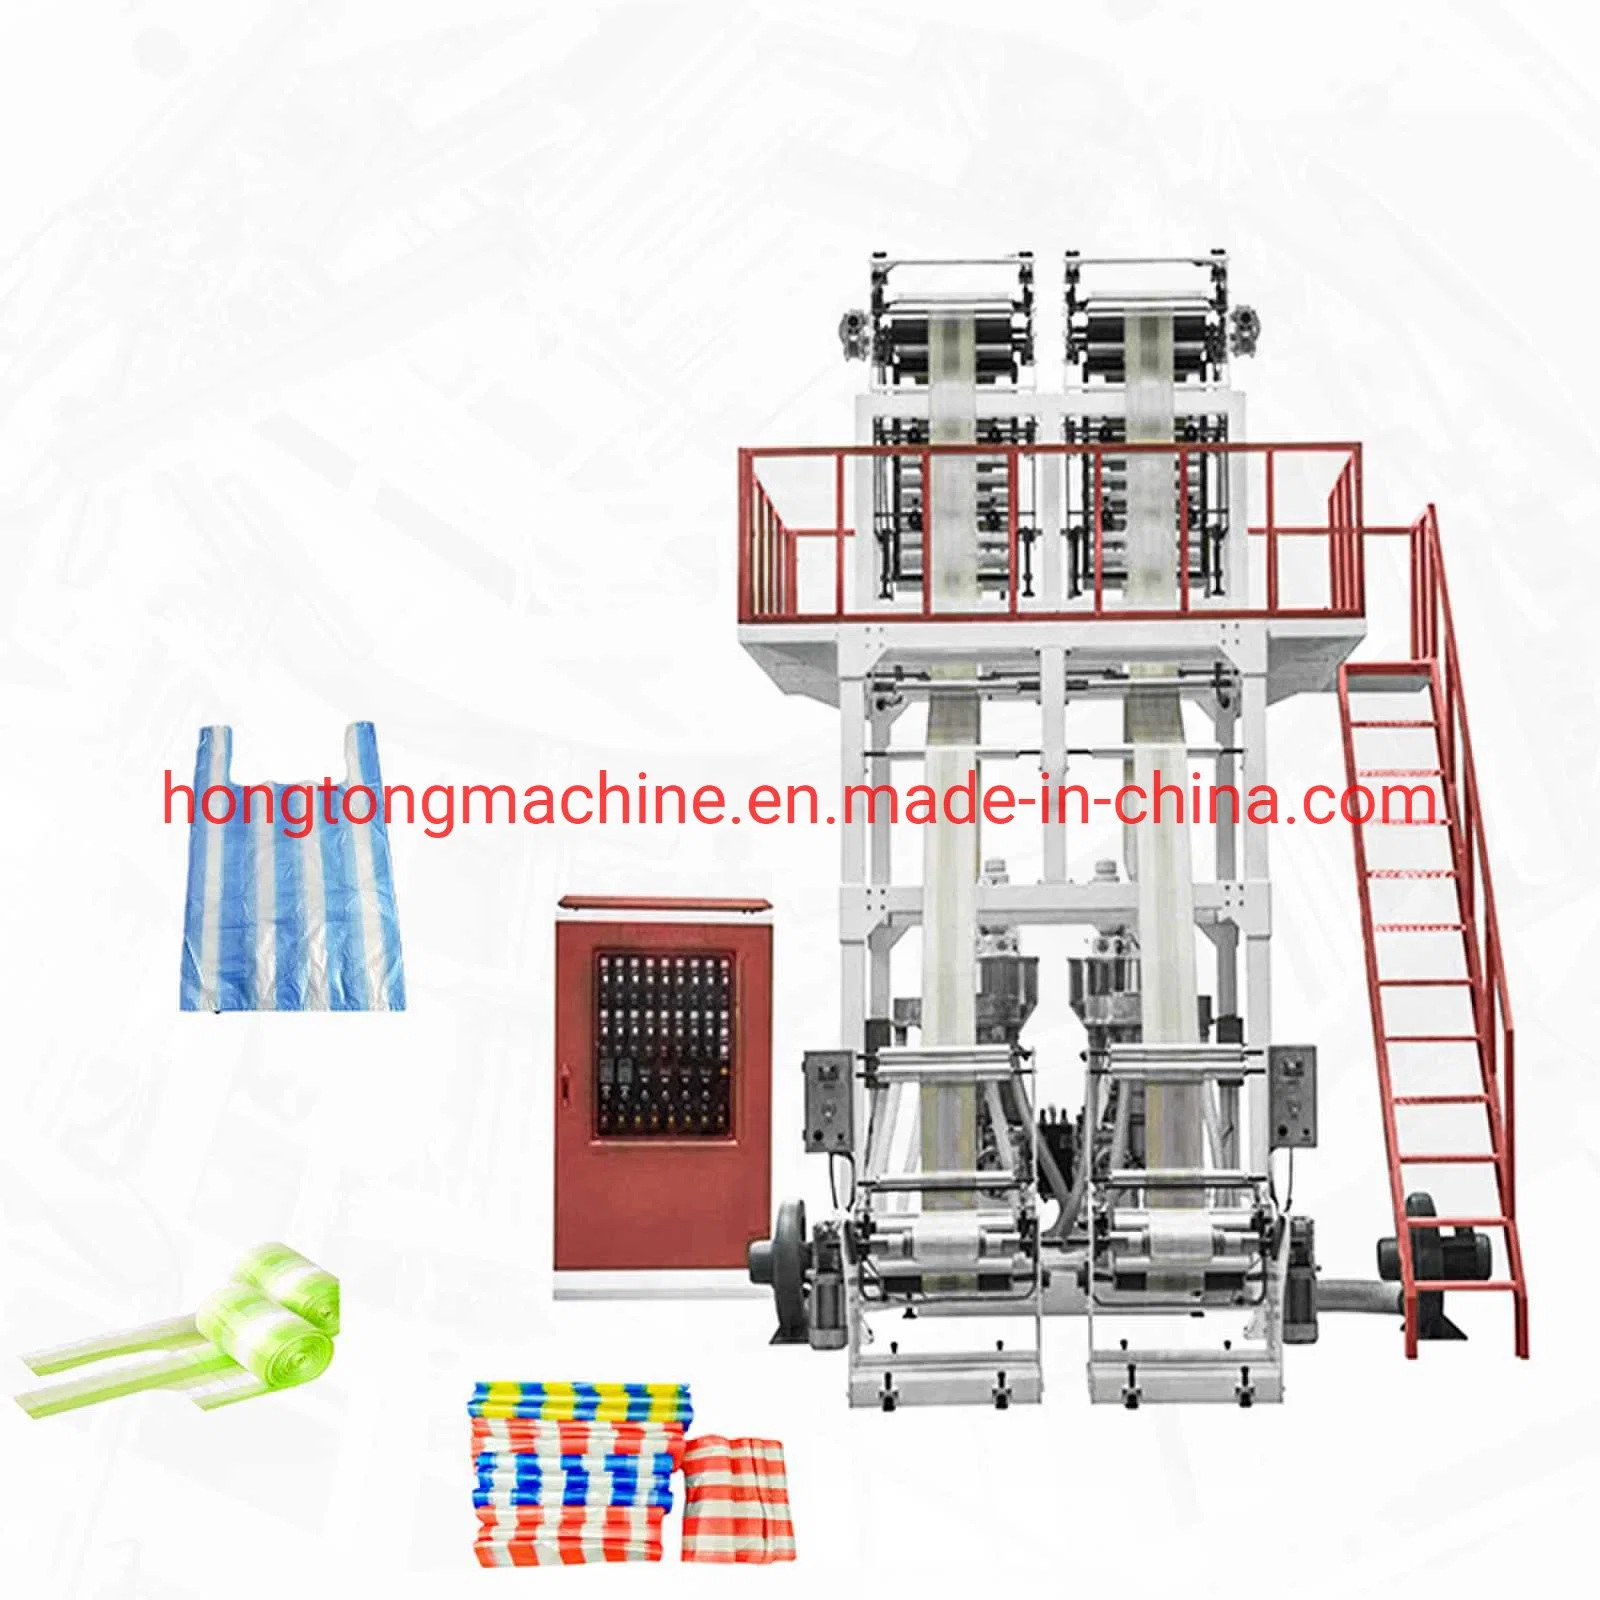 Double-Head Film Blowing Machine Film Blowing Extruder